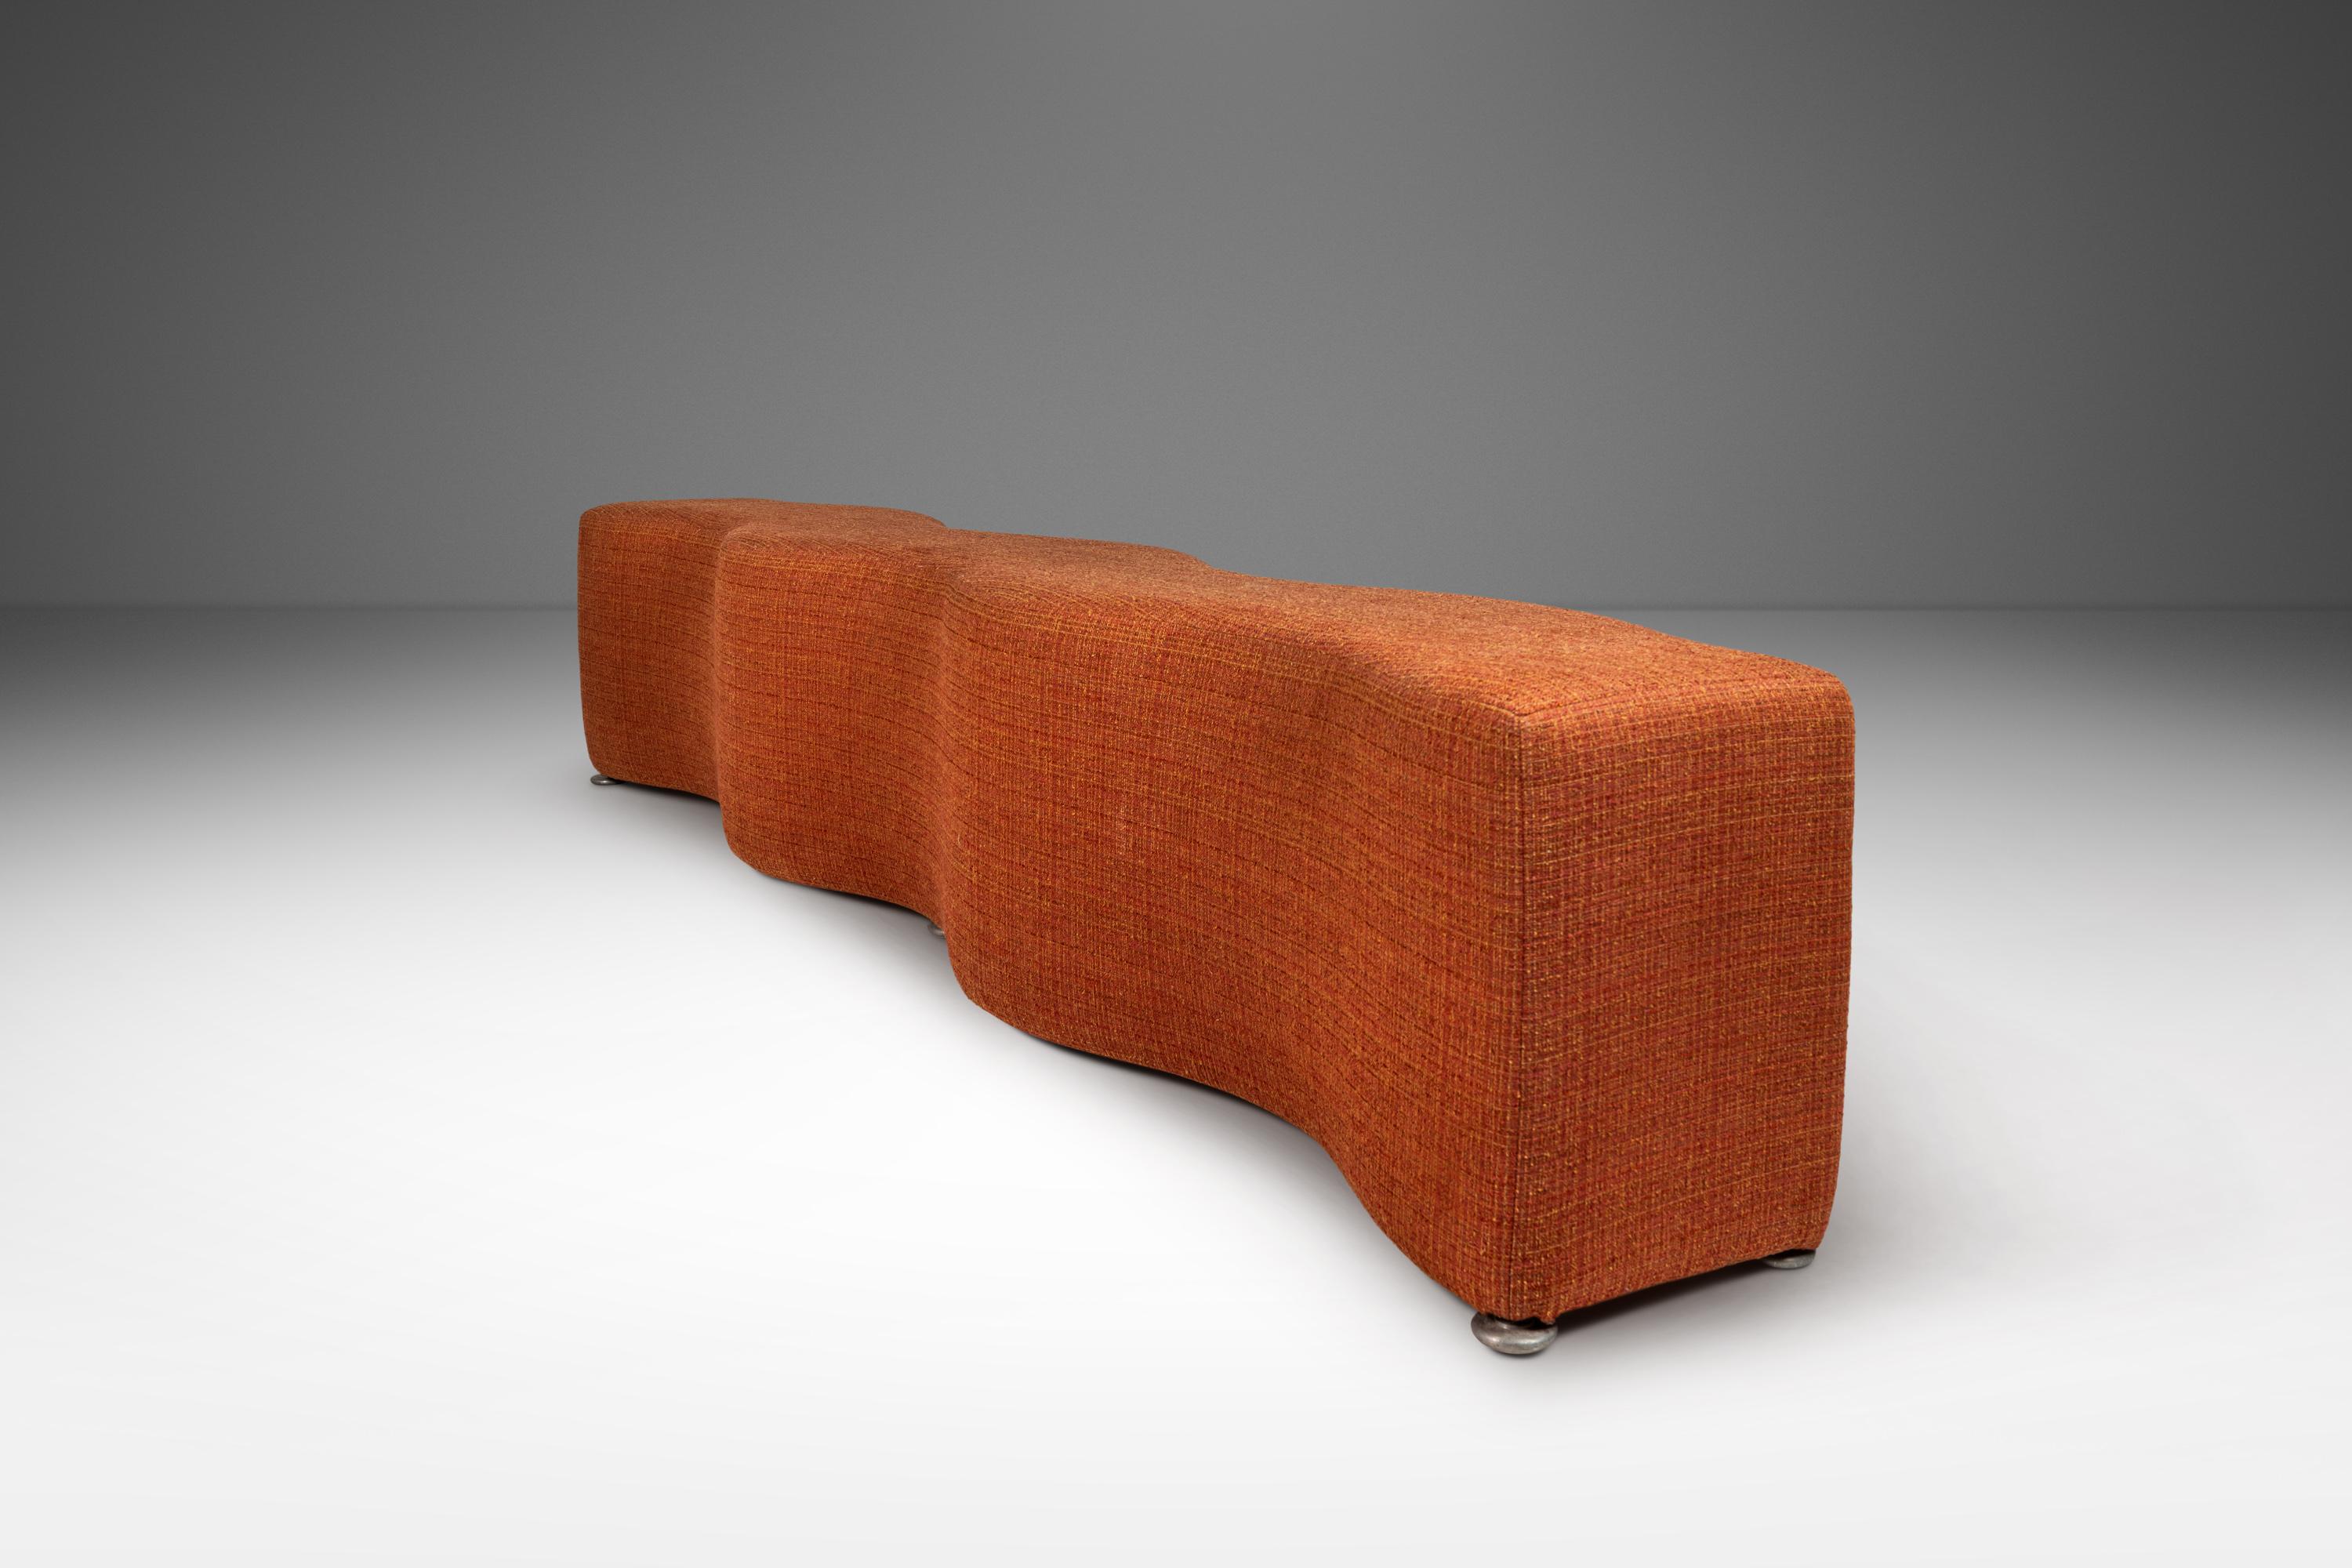 Late 20th Century Post Modern Ripple Wave Bench by Laurinda Spear for Brayton International, 1980s For Sale